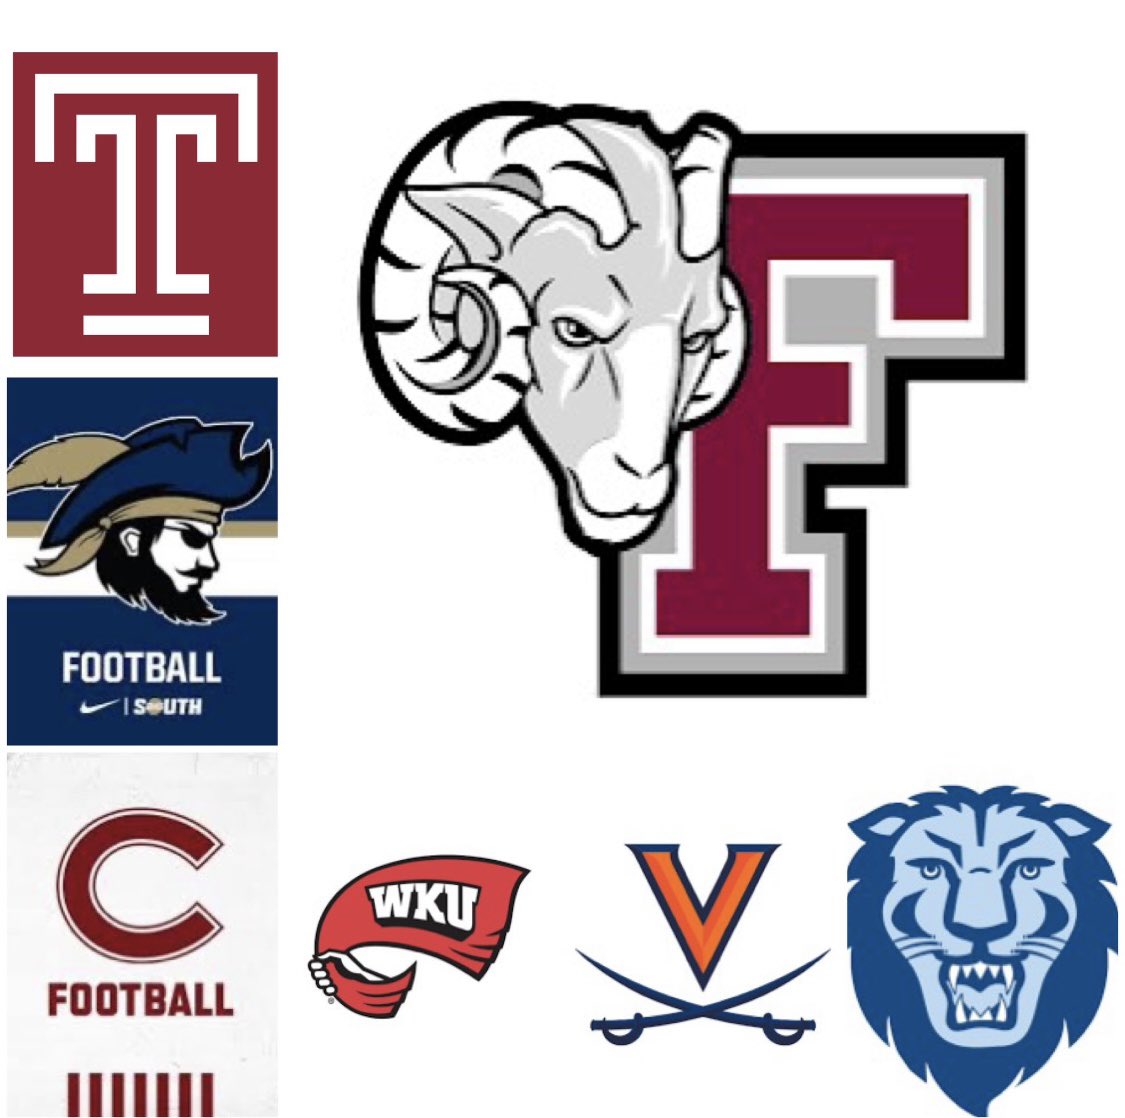 Thanks to Temple, Fordham, Charleston Southern, Colgate, Columbia, Western Kentucky and Virginia for coming by practice this morning and checking out our Hornets! #BMCFootball #1MOORE #DMGB